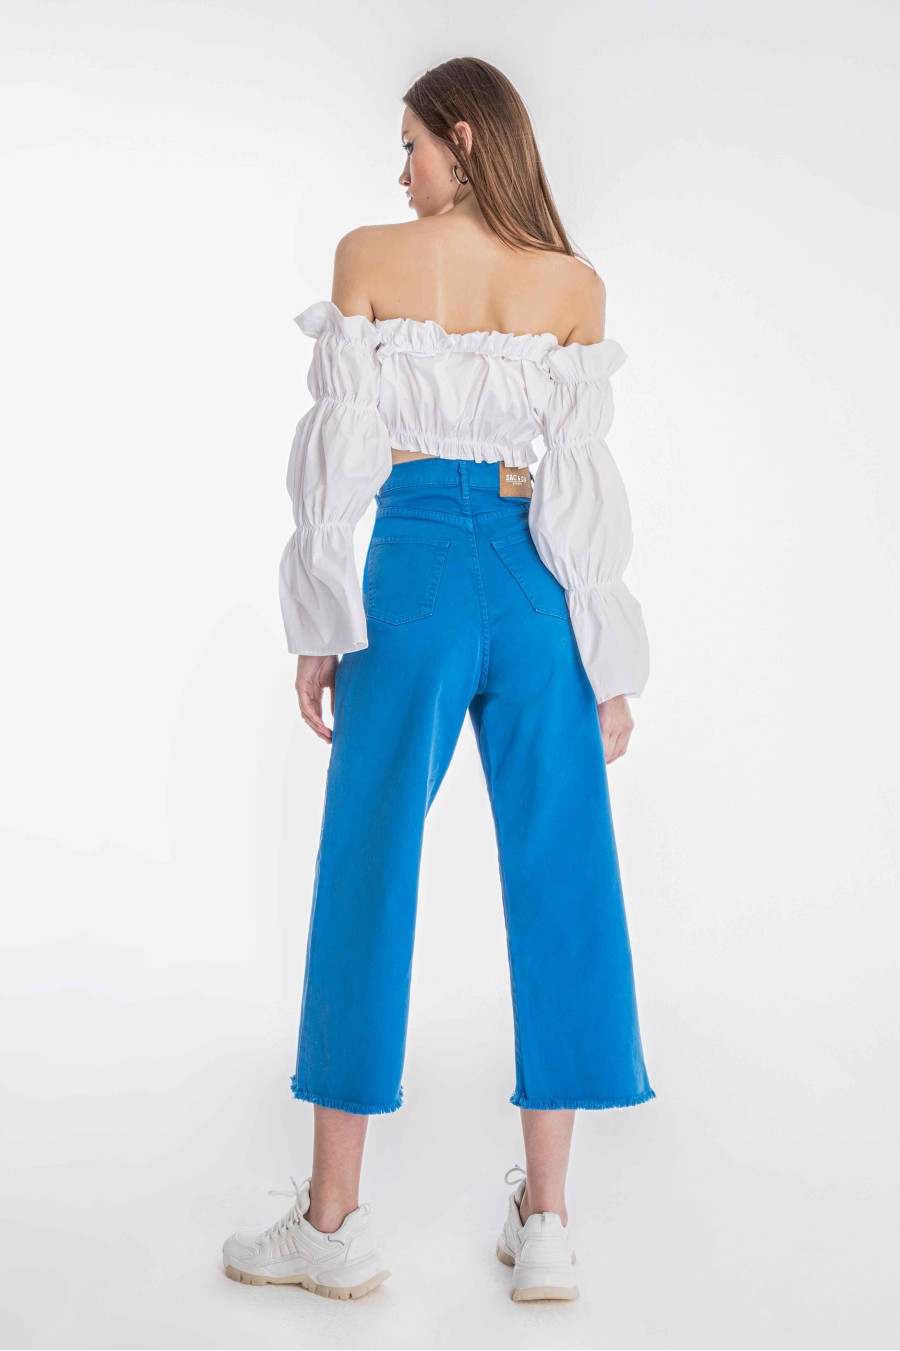 These Jeans Look Super Expensive But They're Only $24 From H&M | Denim  trends, What to wear in la, Summer denim